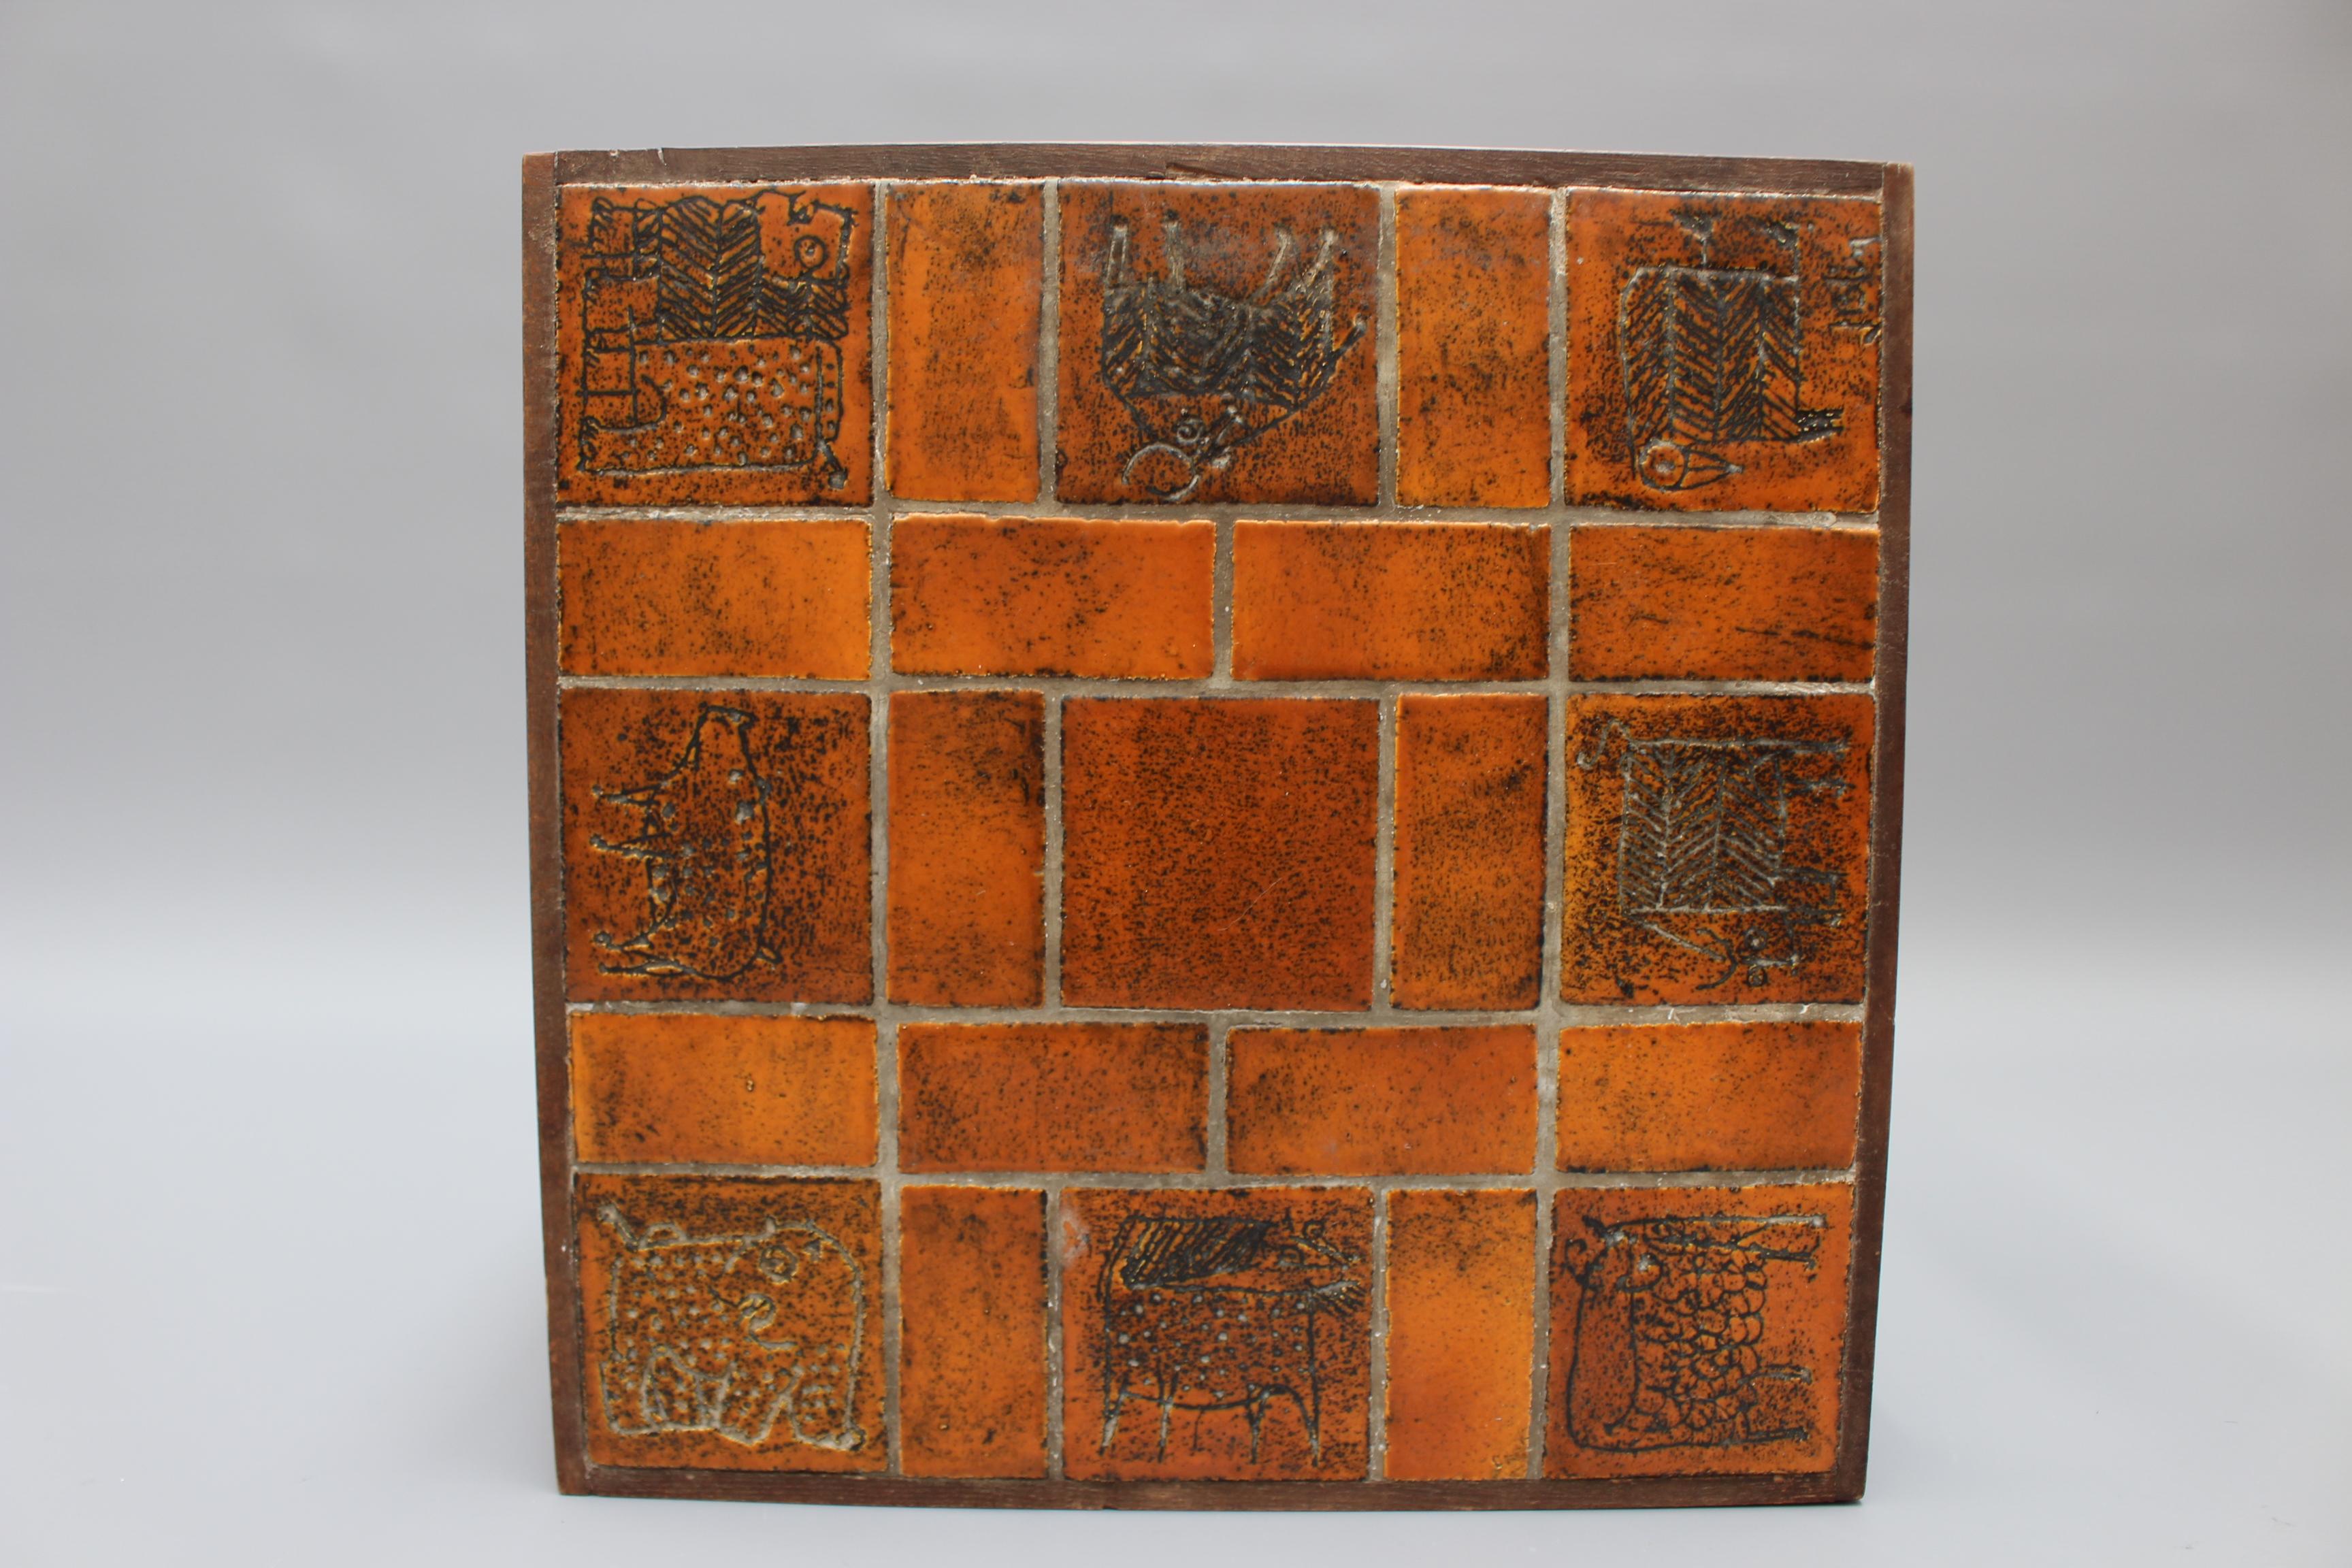 Vintage French Square Side Table with Ceramic Tile Top by Jacques Blin, c. 1950s For Sale 10